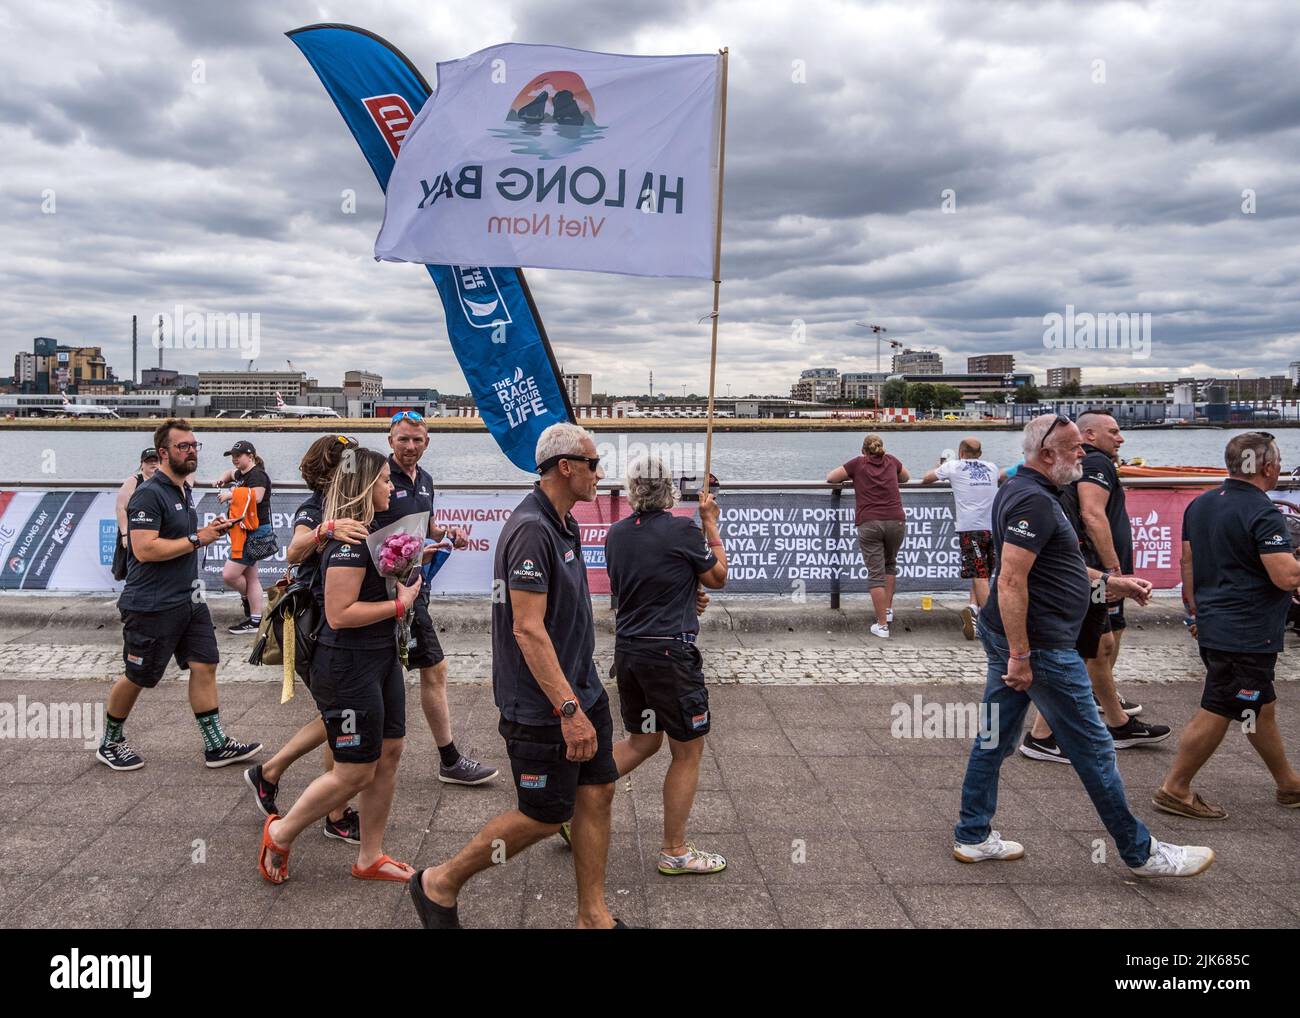 The Royal Docks London Event - Clipper Round the World Yacht Race, finale Celebrations, 2022 juillet, East London, E16, Angleterre, Royaume-Uni. Banque D'Images